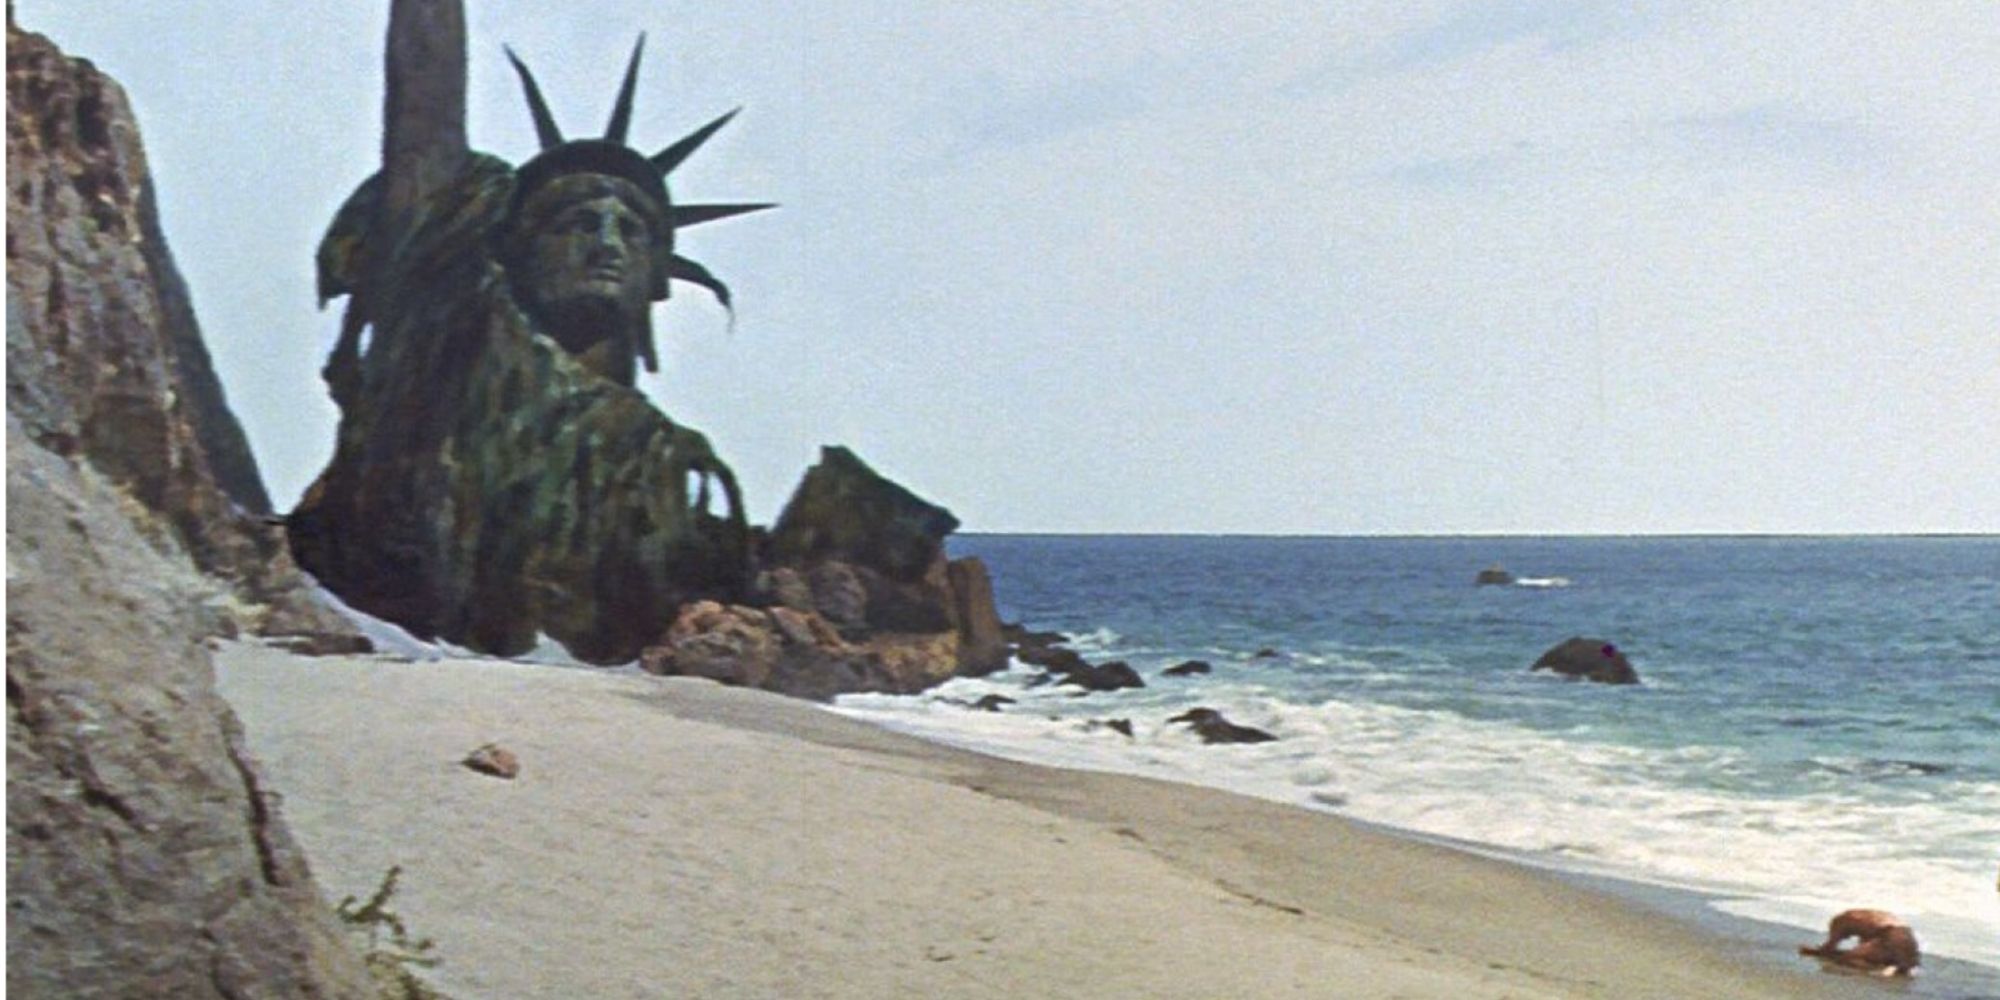 Planet of the Apes ends of a classic note of complete hopelessness